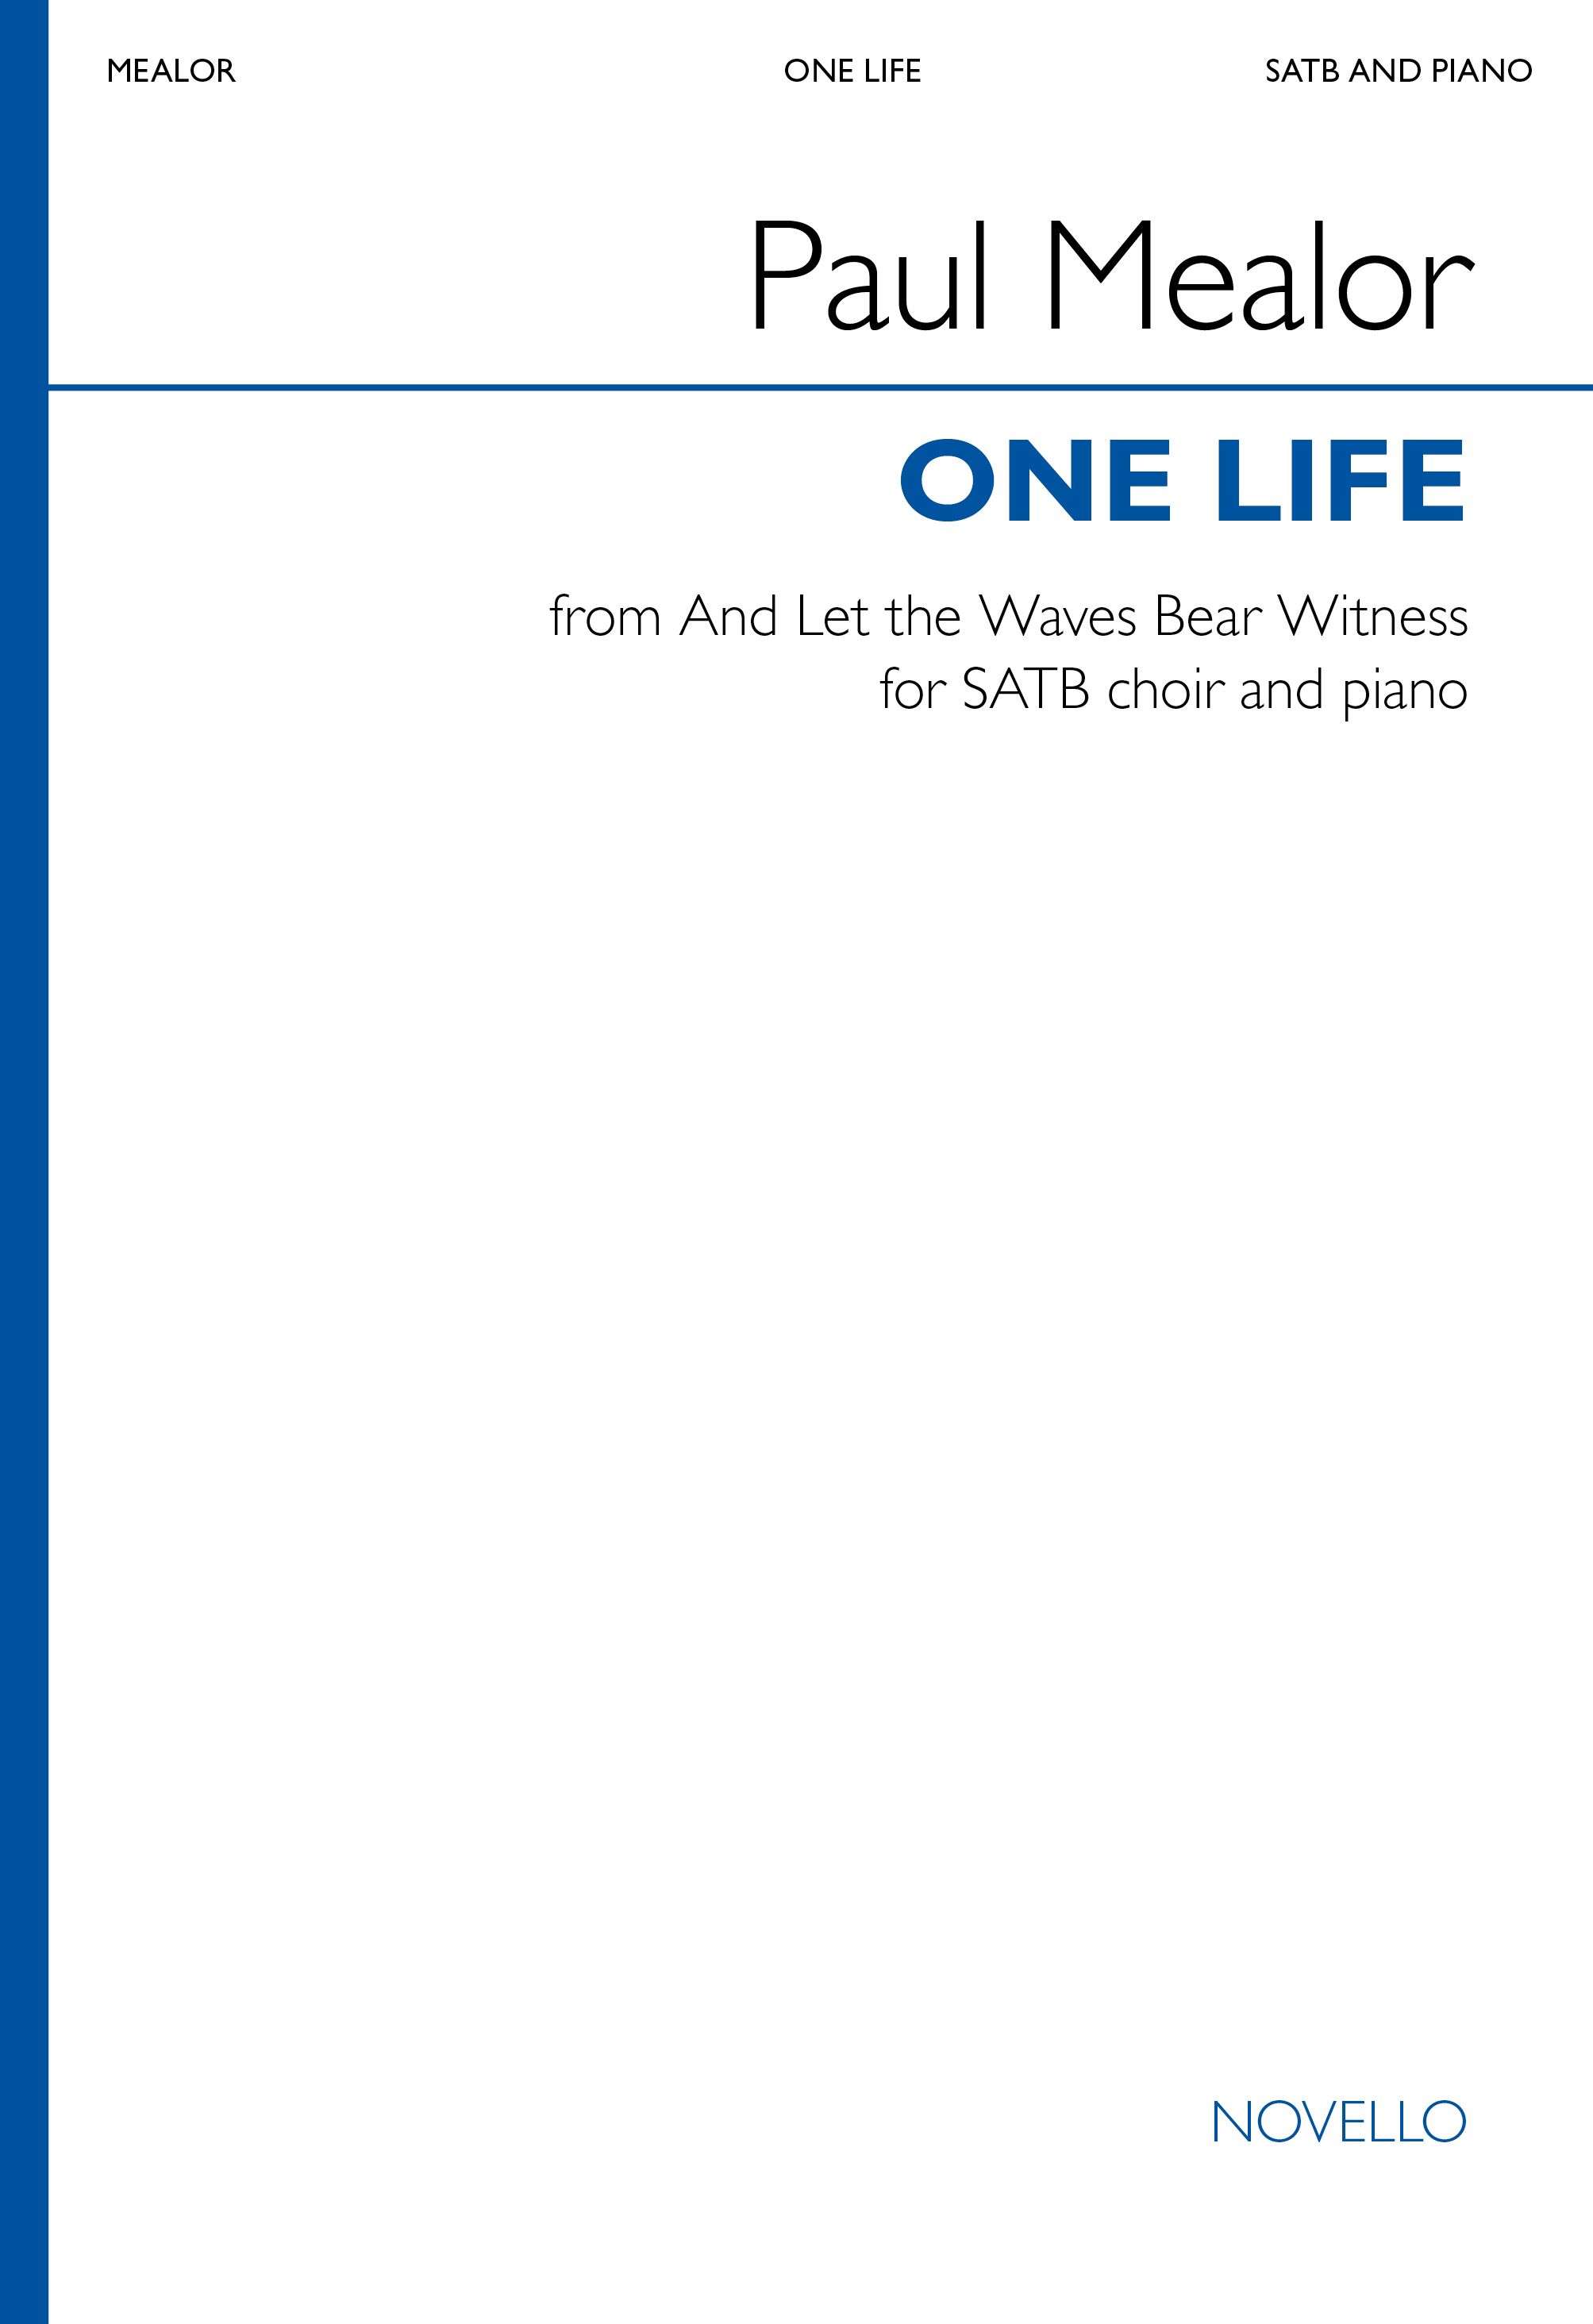 Paul Mealor: One Life: Mixed Choir and Piano/Organ: Choral Score